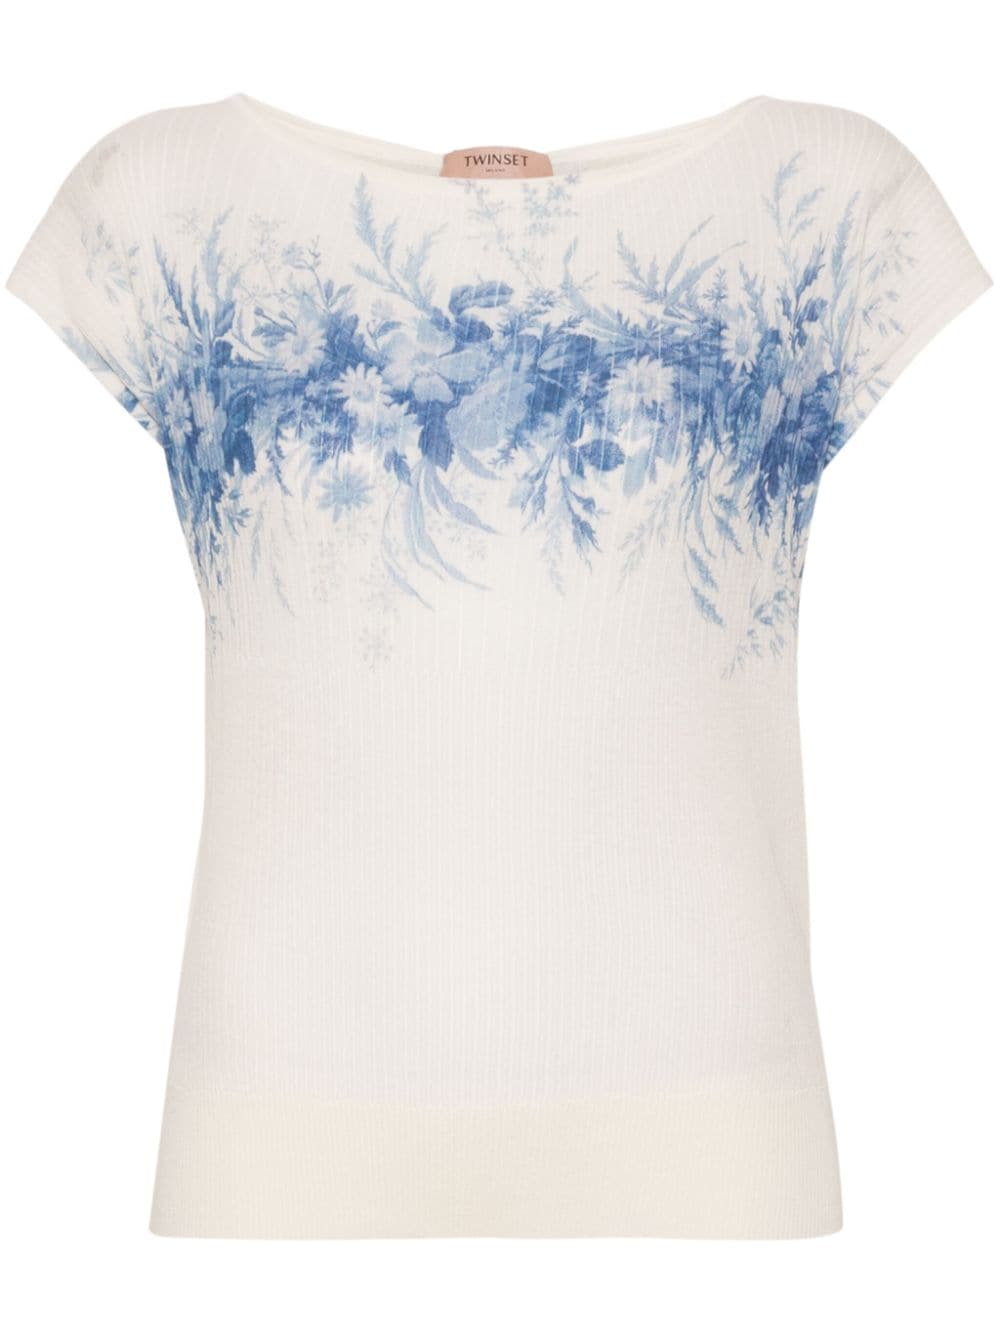 TWINSET floral-print ribbed top - White von TWINSET